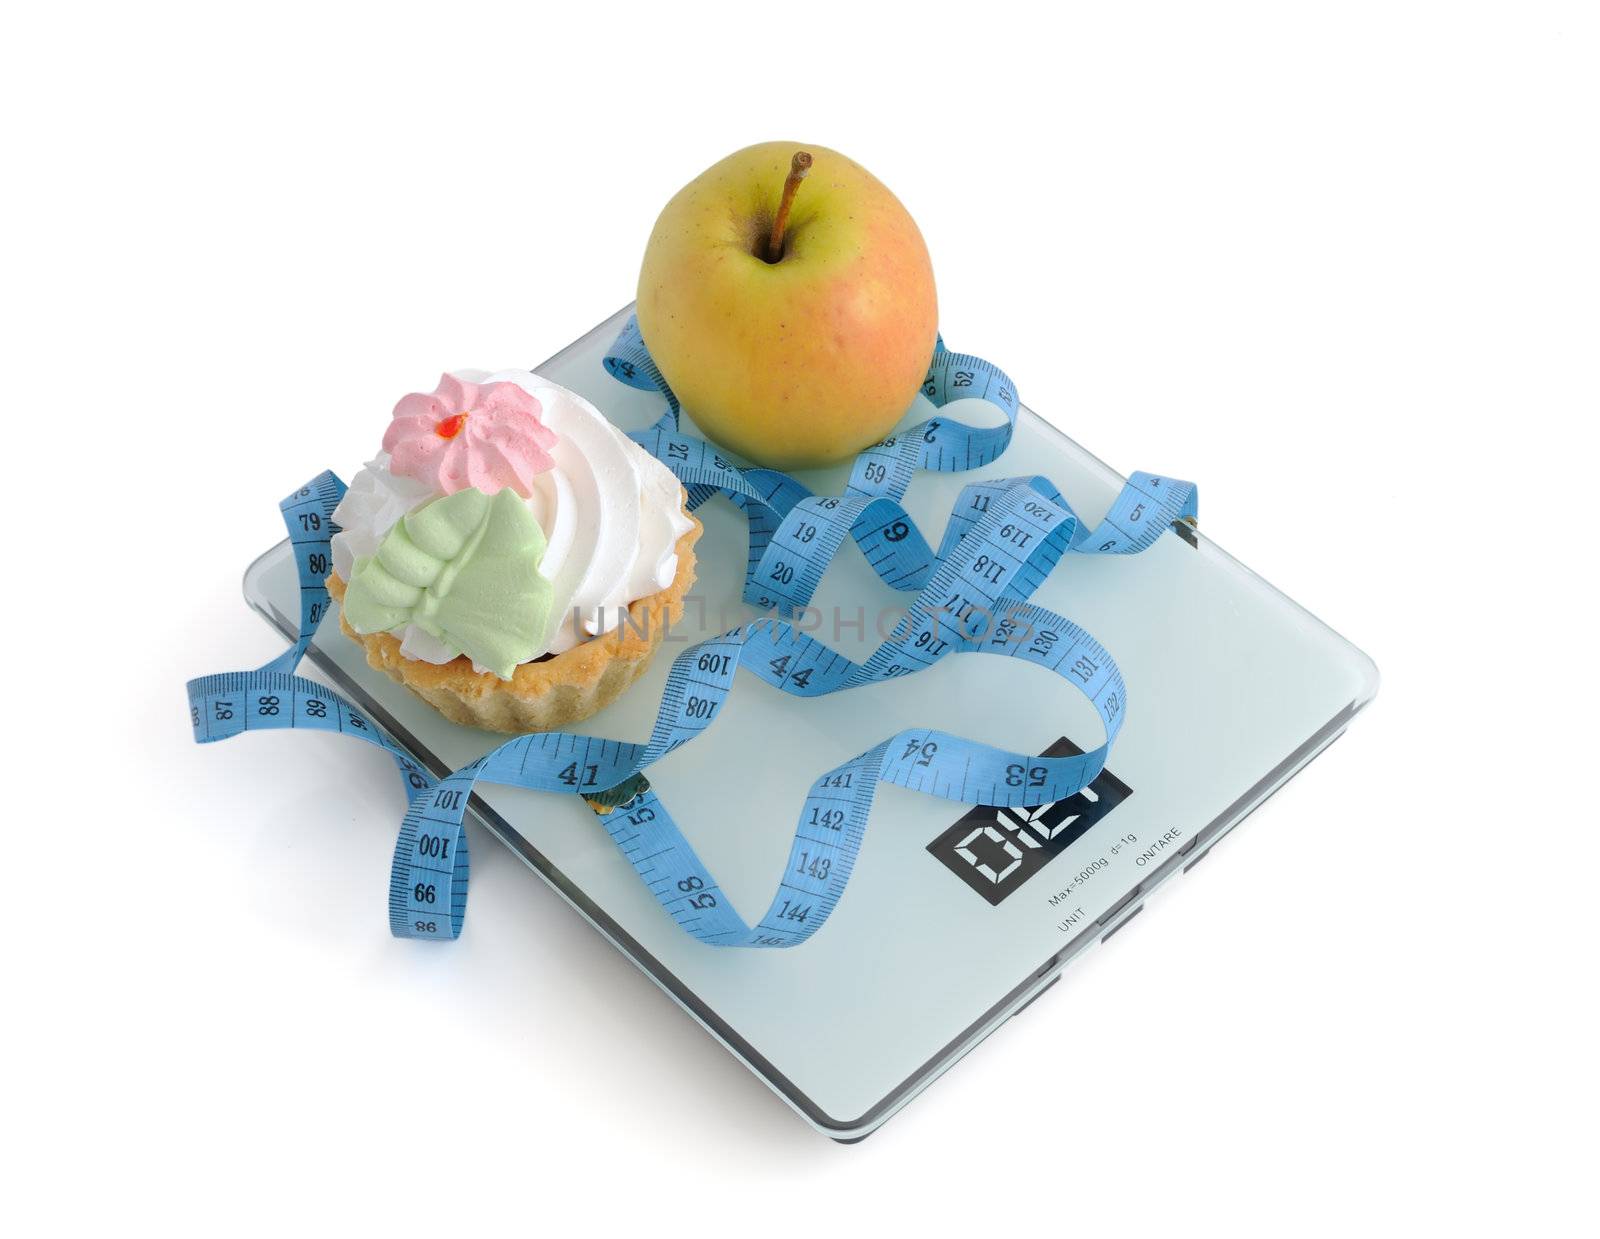 The dilemma of cake or an apple wrapped in the centimeter scale on white background 